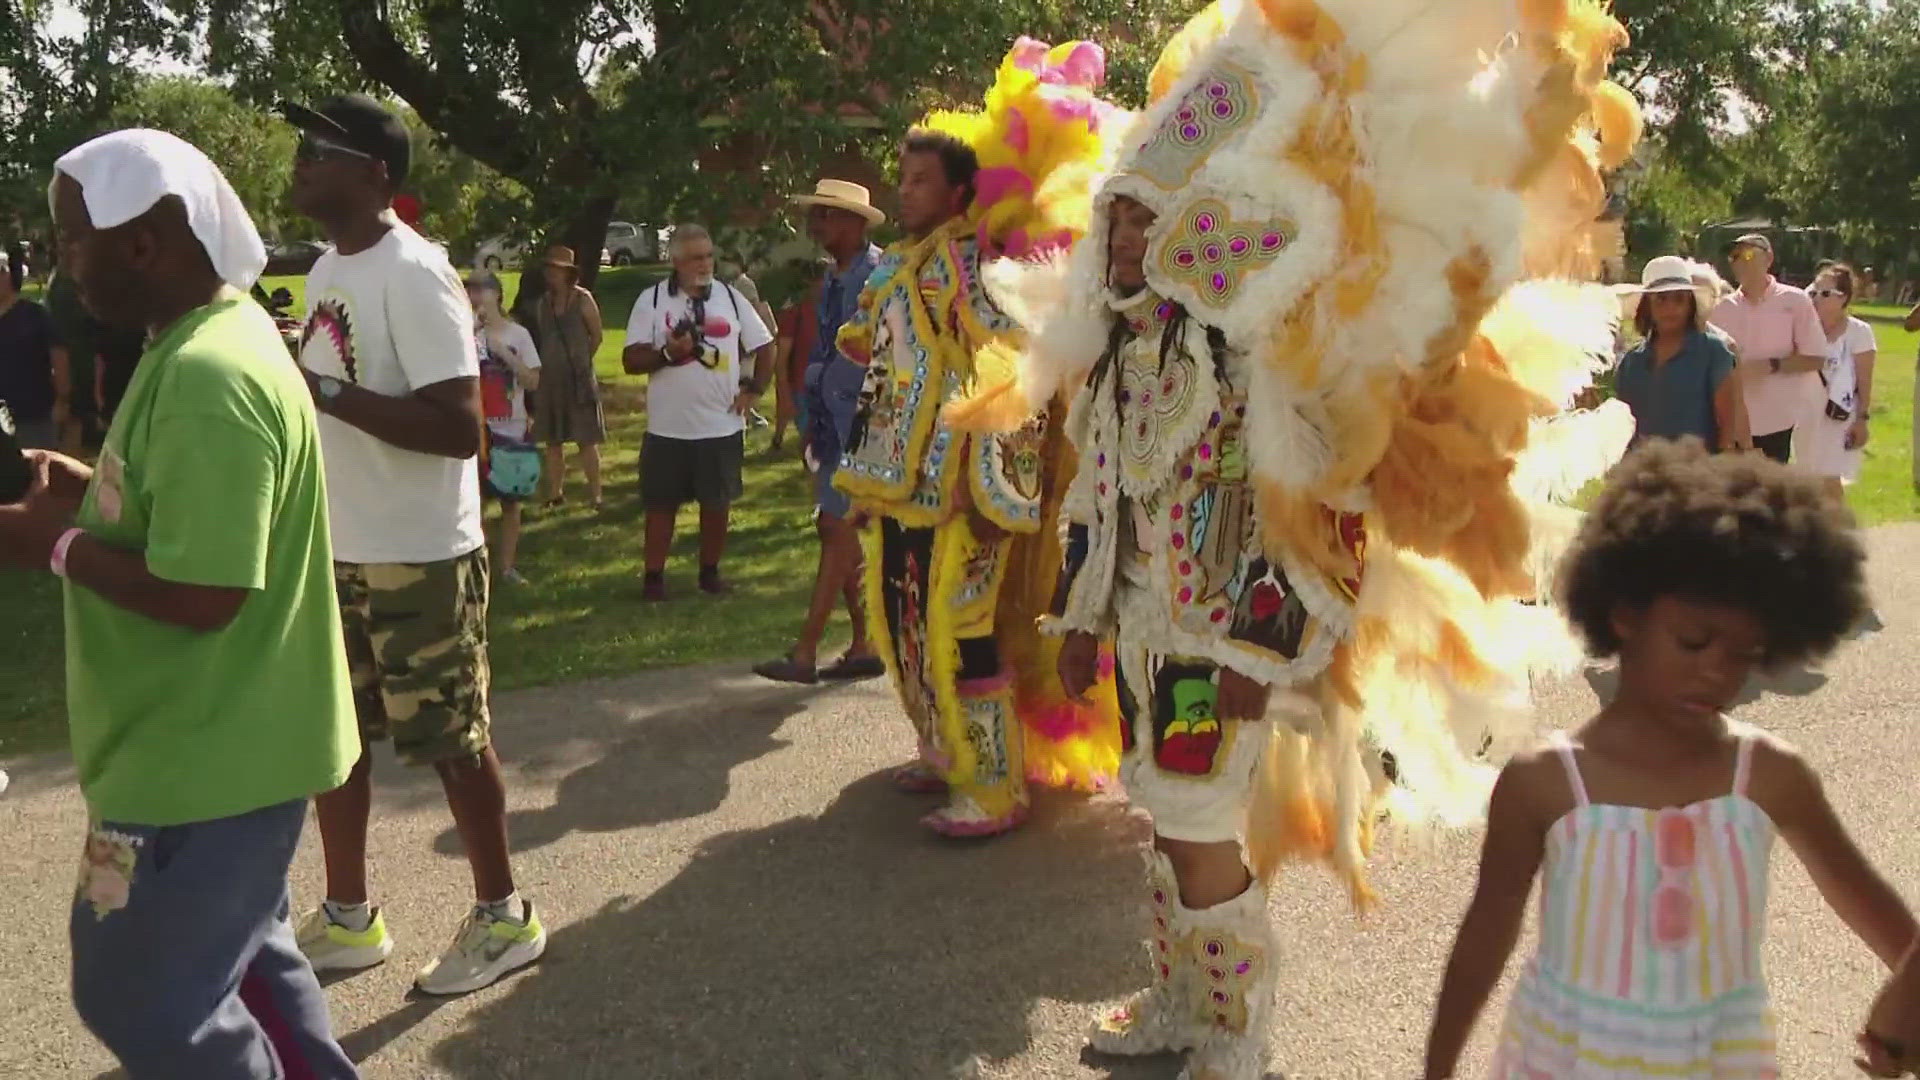 The 'Spirit of Louisiana' Jazz funeral and second line was held at City Park on Saturday. It honored the lives of those lost to the virus.